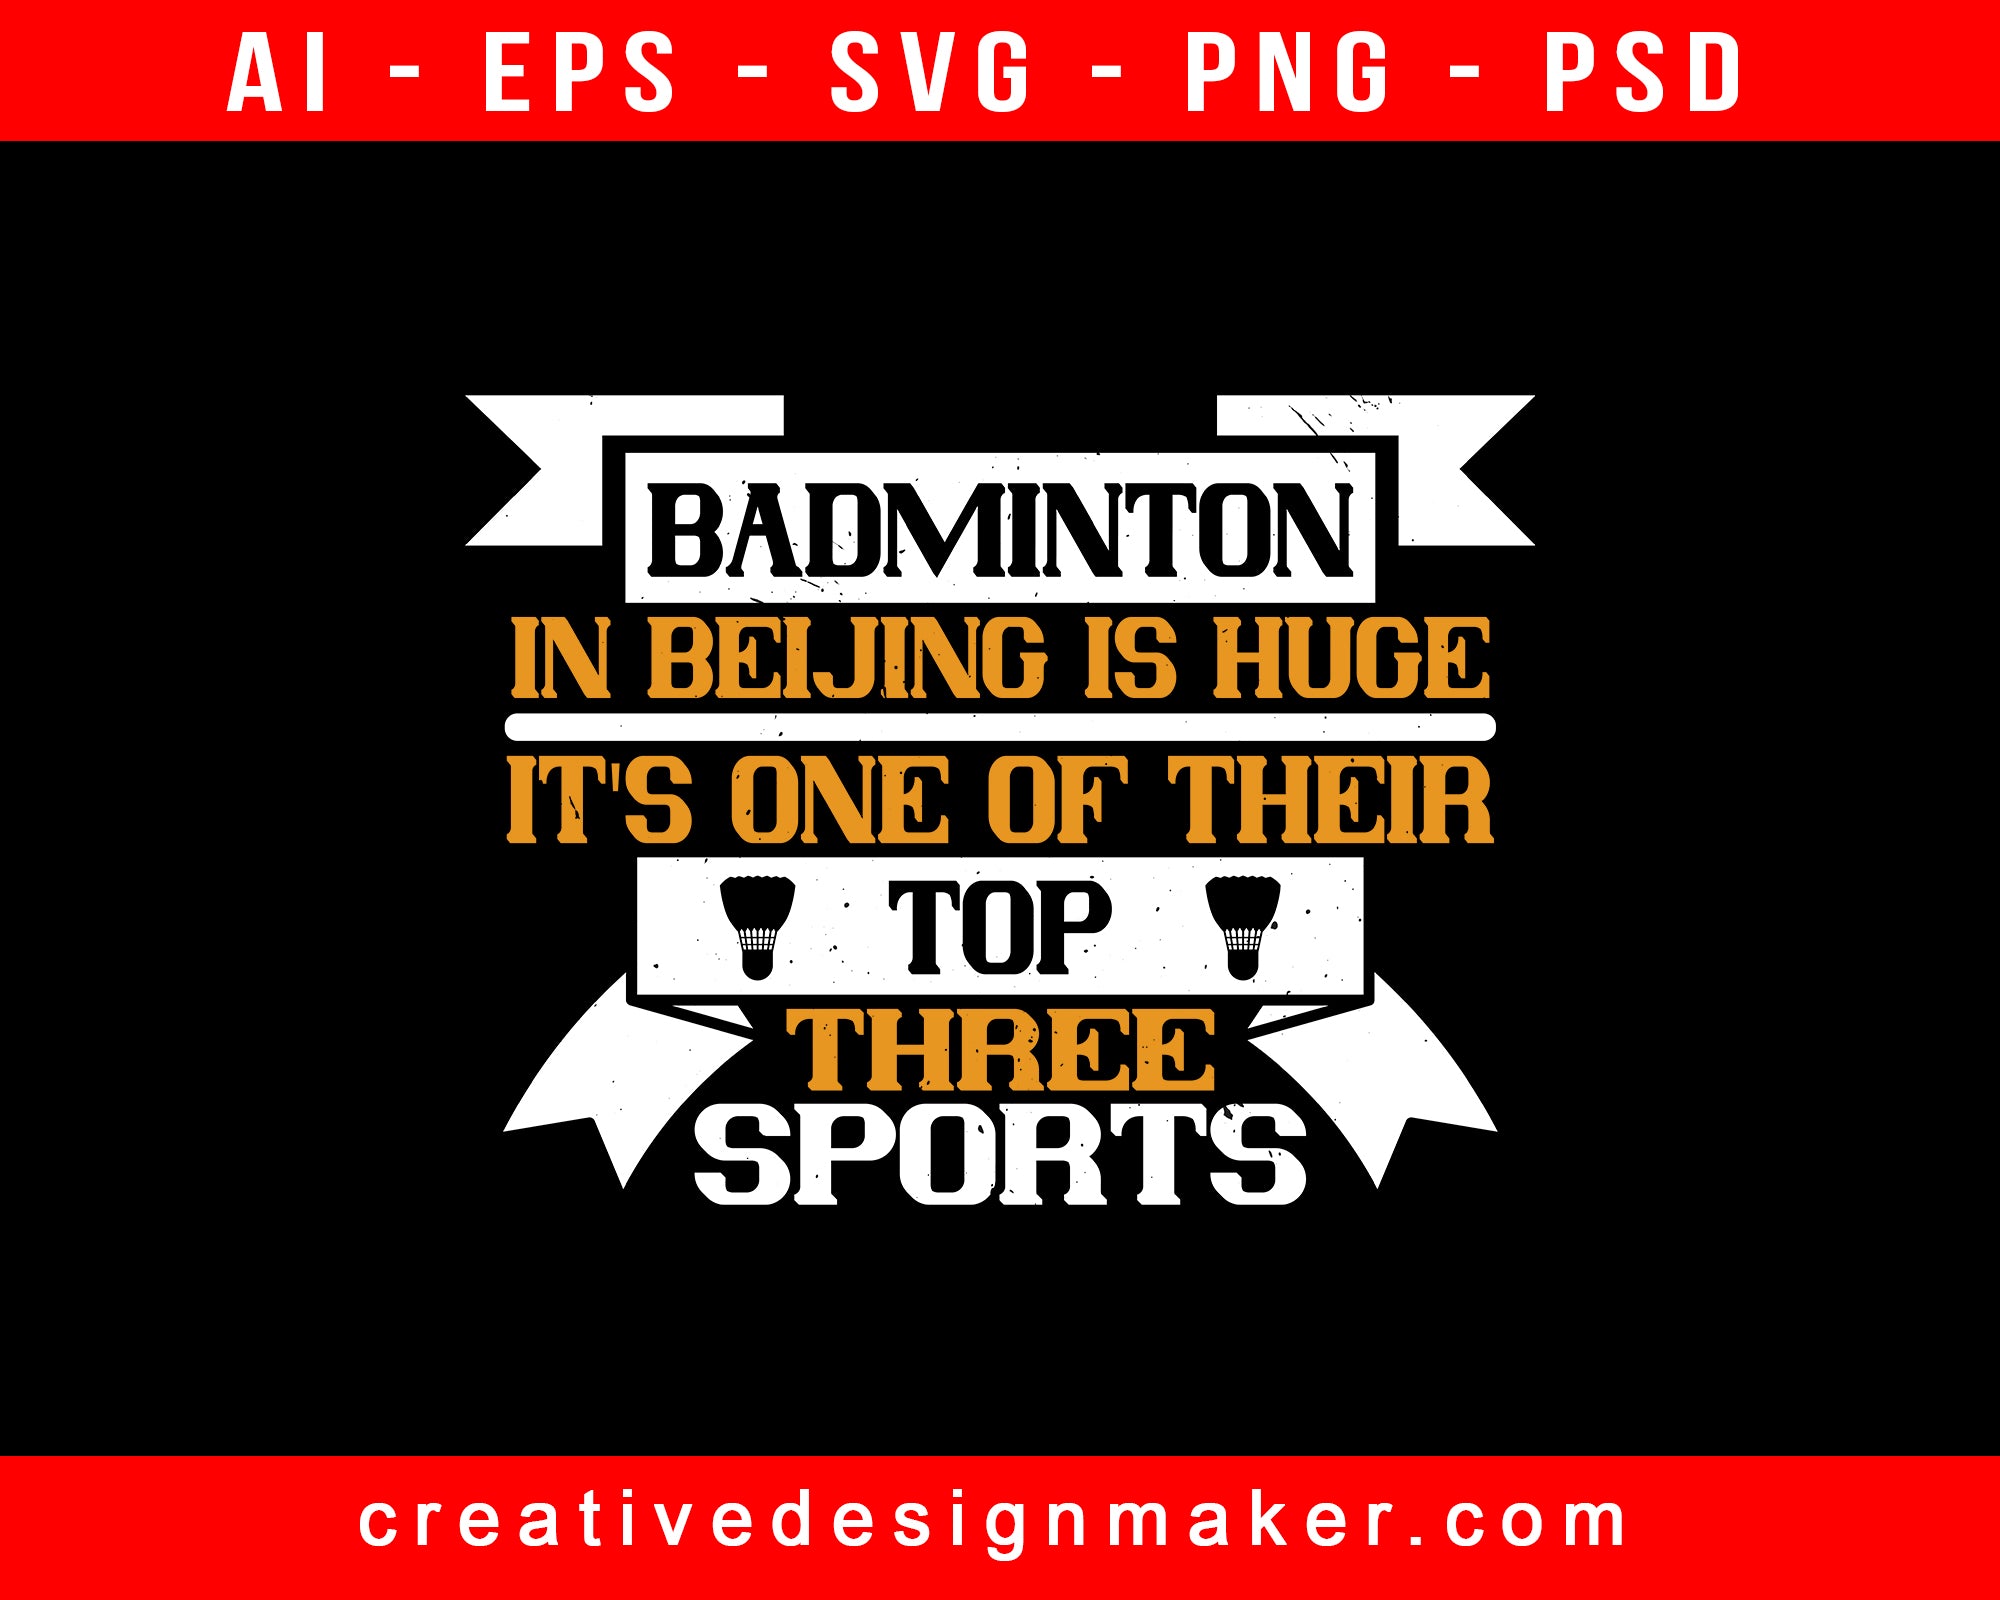 Badminton In Beijing Is Huge - It's One Of Their Top Three Sports Print Ready Editable T-Shirt SVG Design!